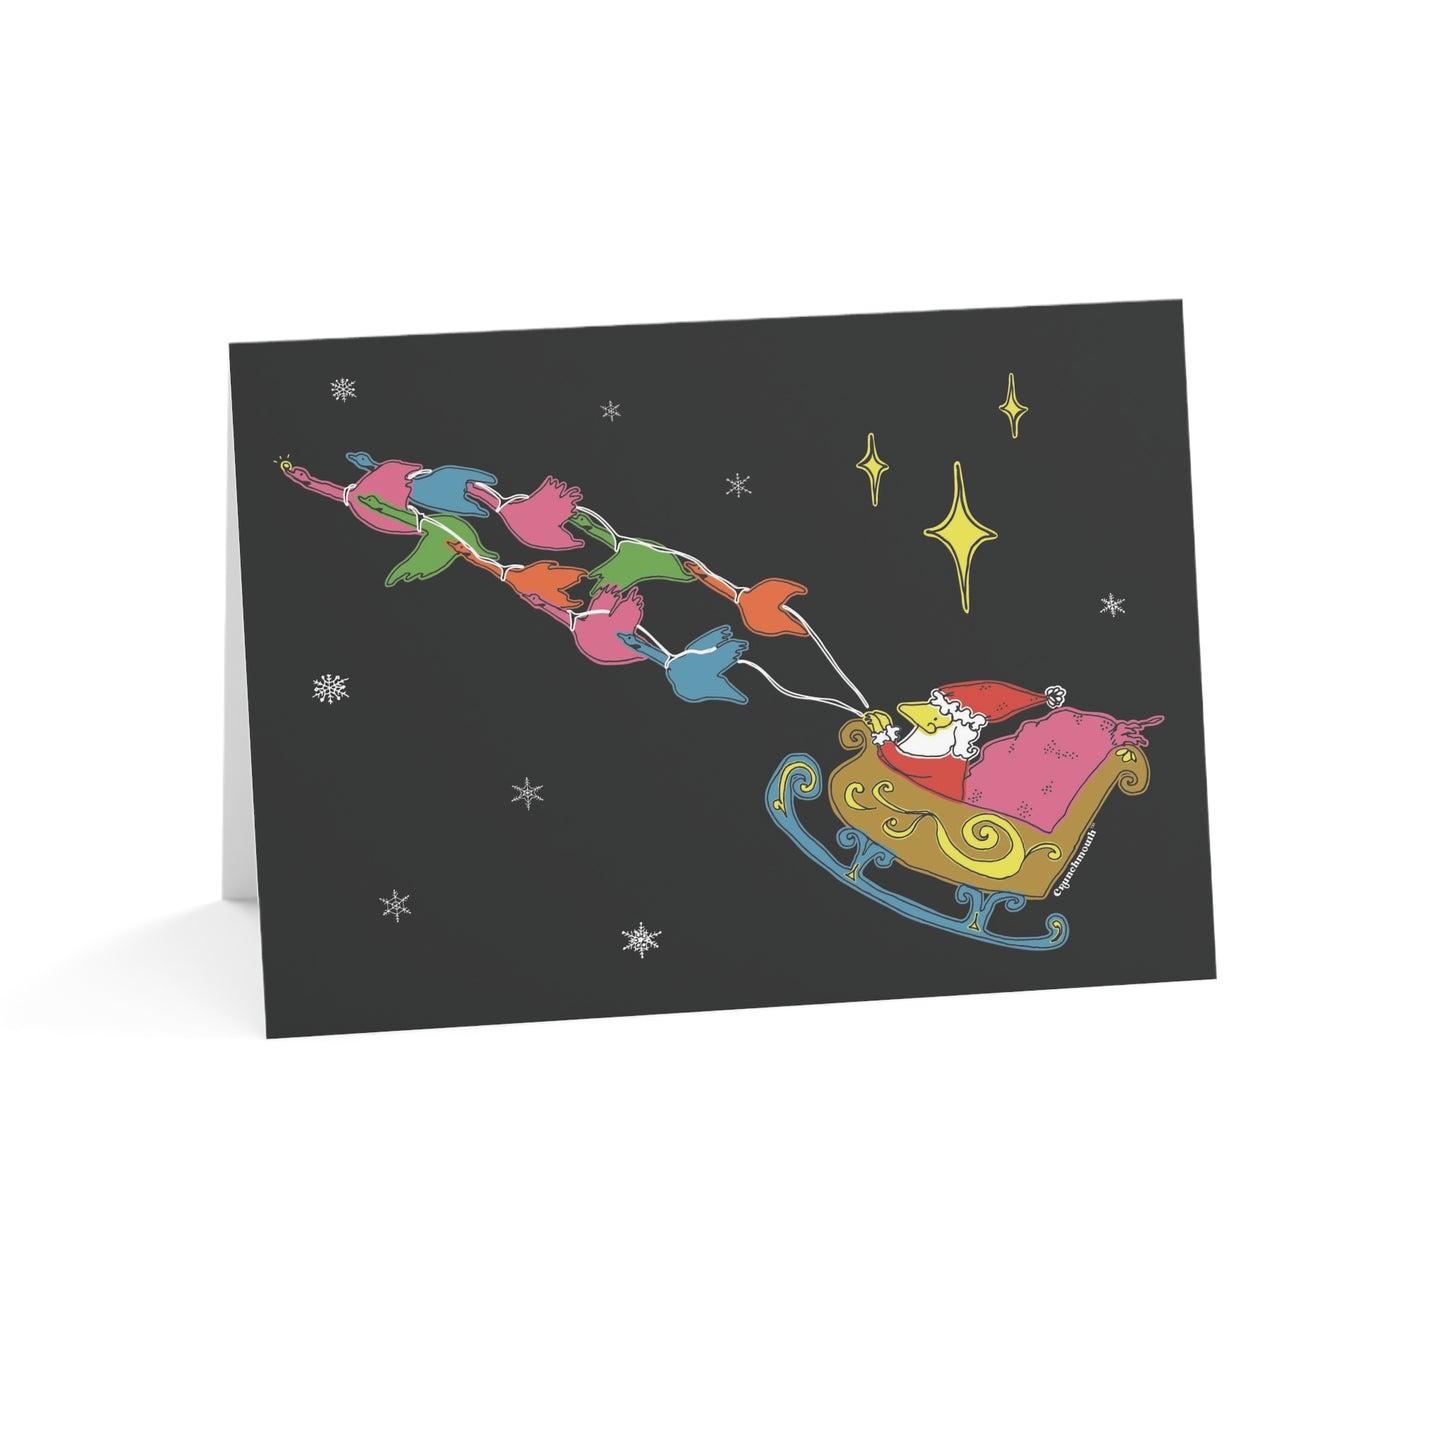 santa sleigh pulled by canada geese holiday greeting card